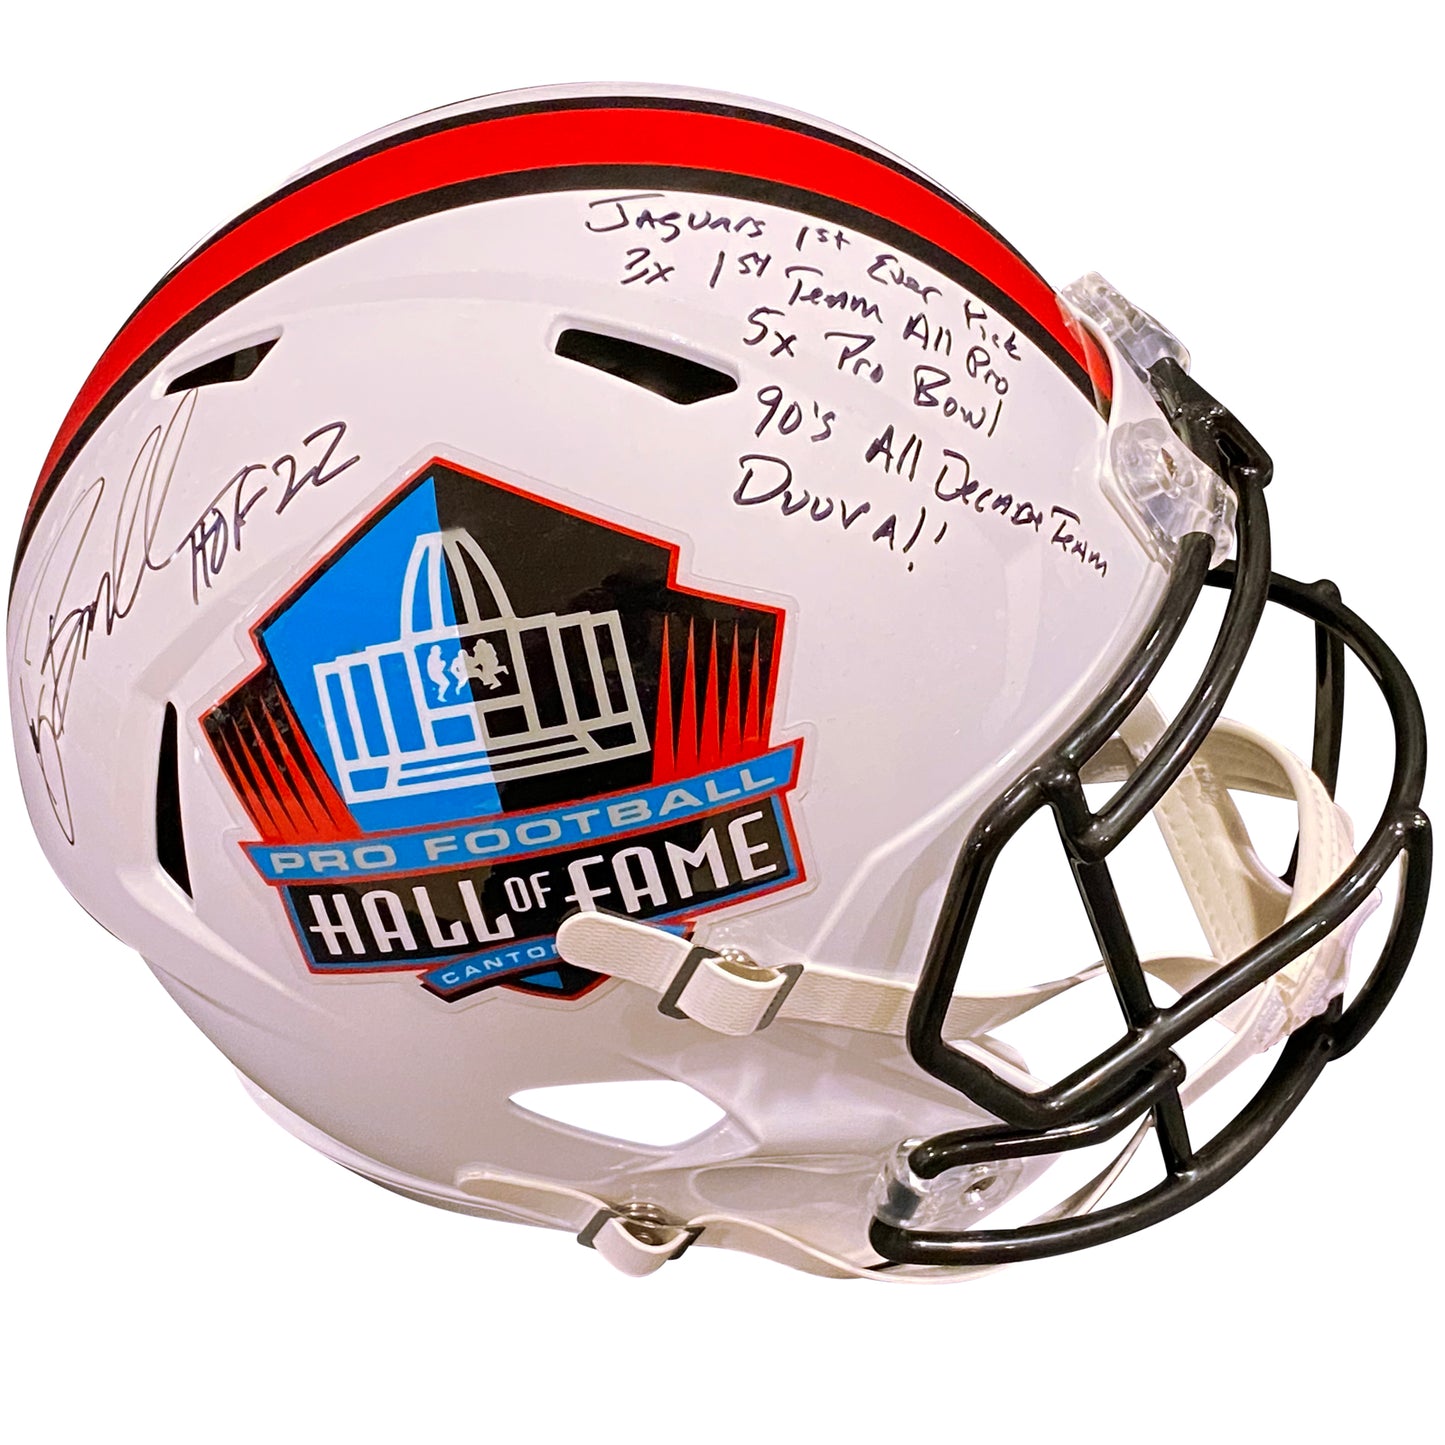 Tony Boselli Autographed Hall of Fame Shield Deluxe Full-Size Replica Helmet w/ Stat Inscriptions - Limited Edition